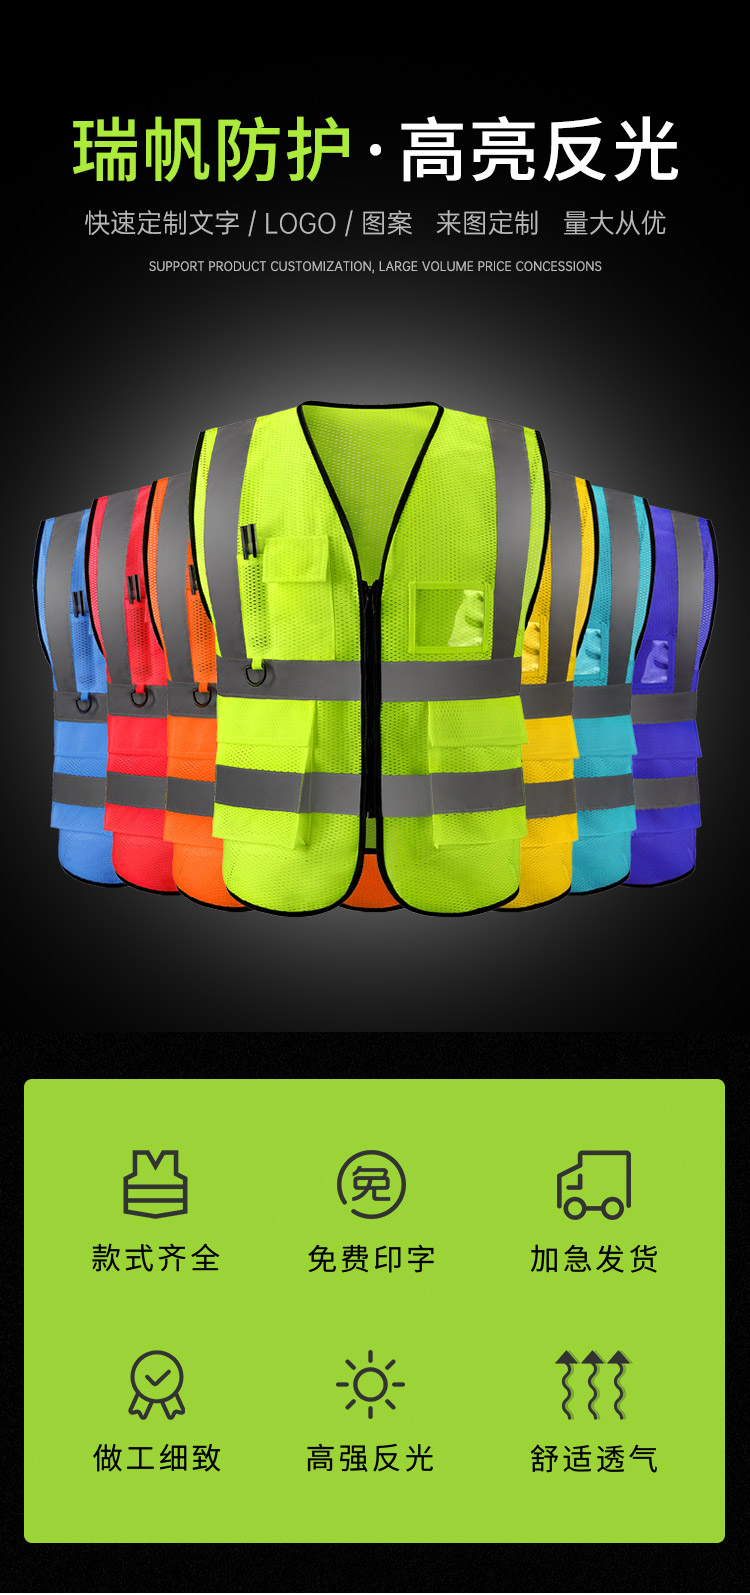 Ruifan Protection Worry-free Aftersales Traffic Duty Net Fabric Four Bar Reflective Vest, Day and Night Eye-catching, Fast Shipping